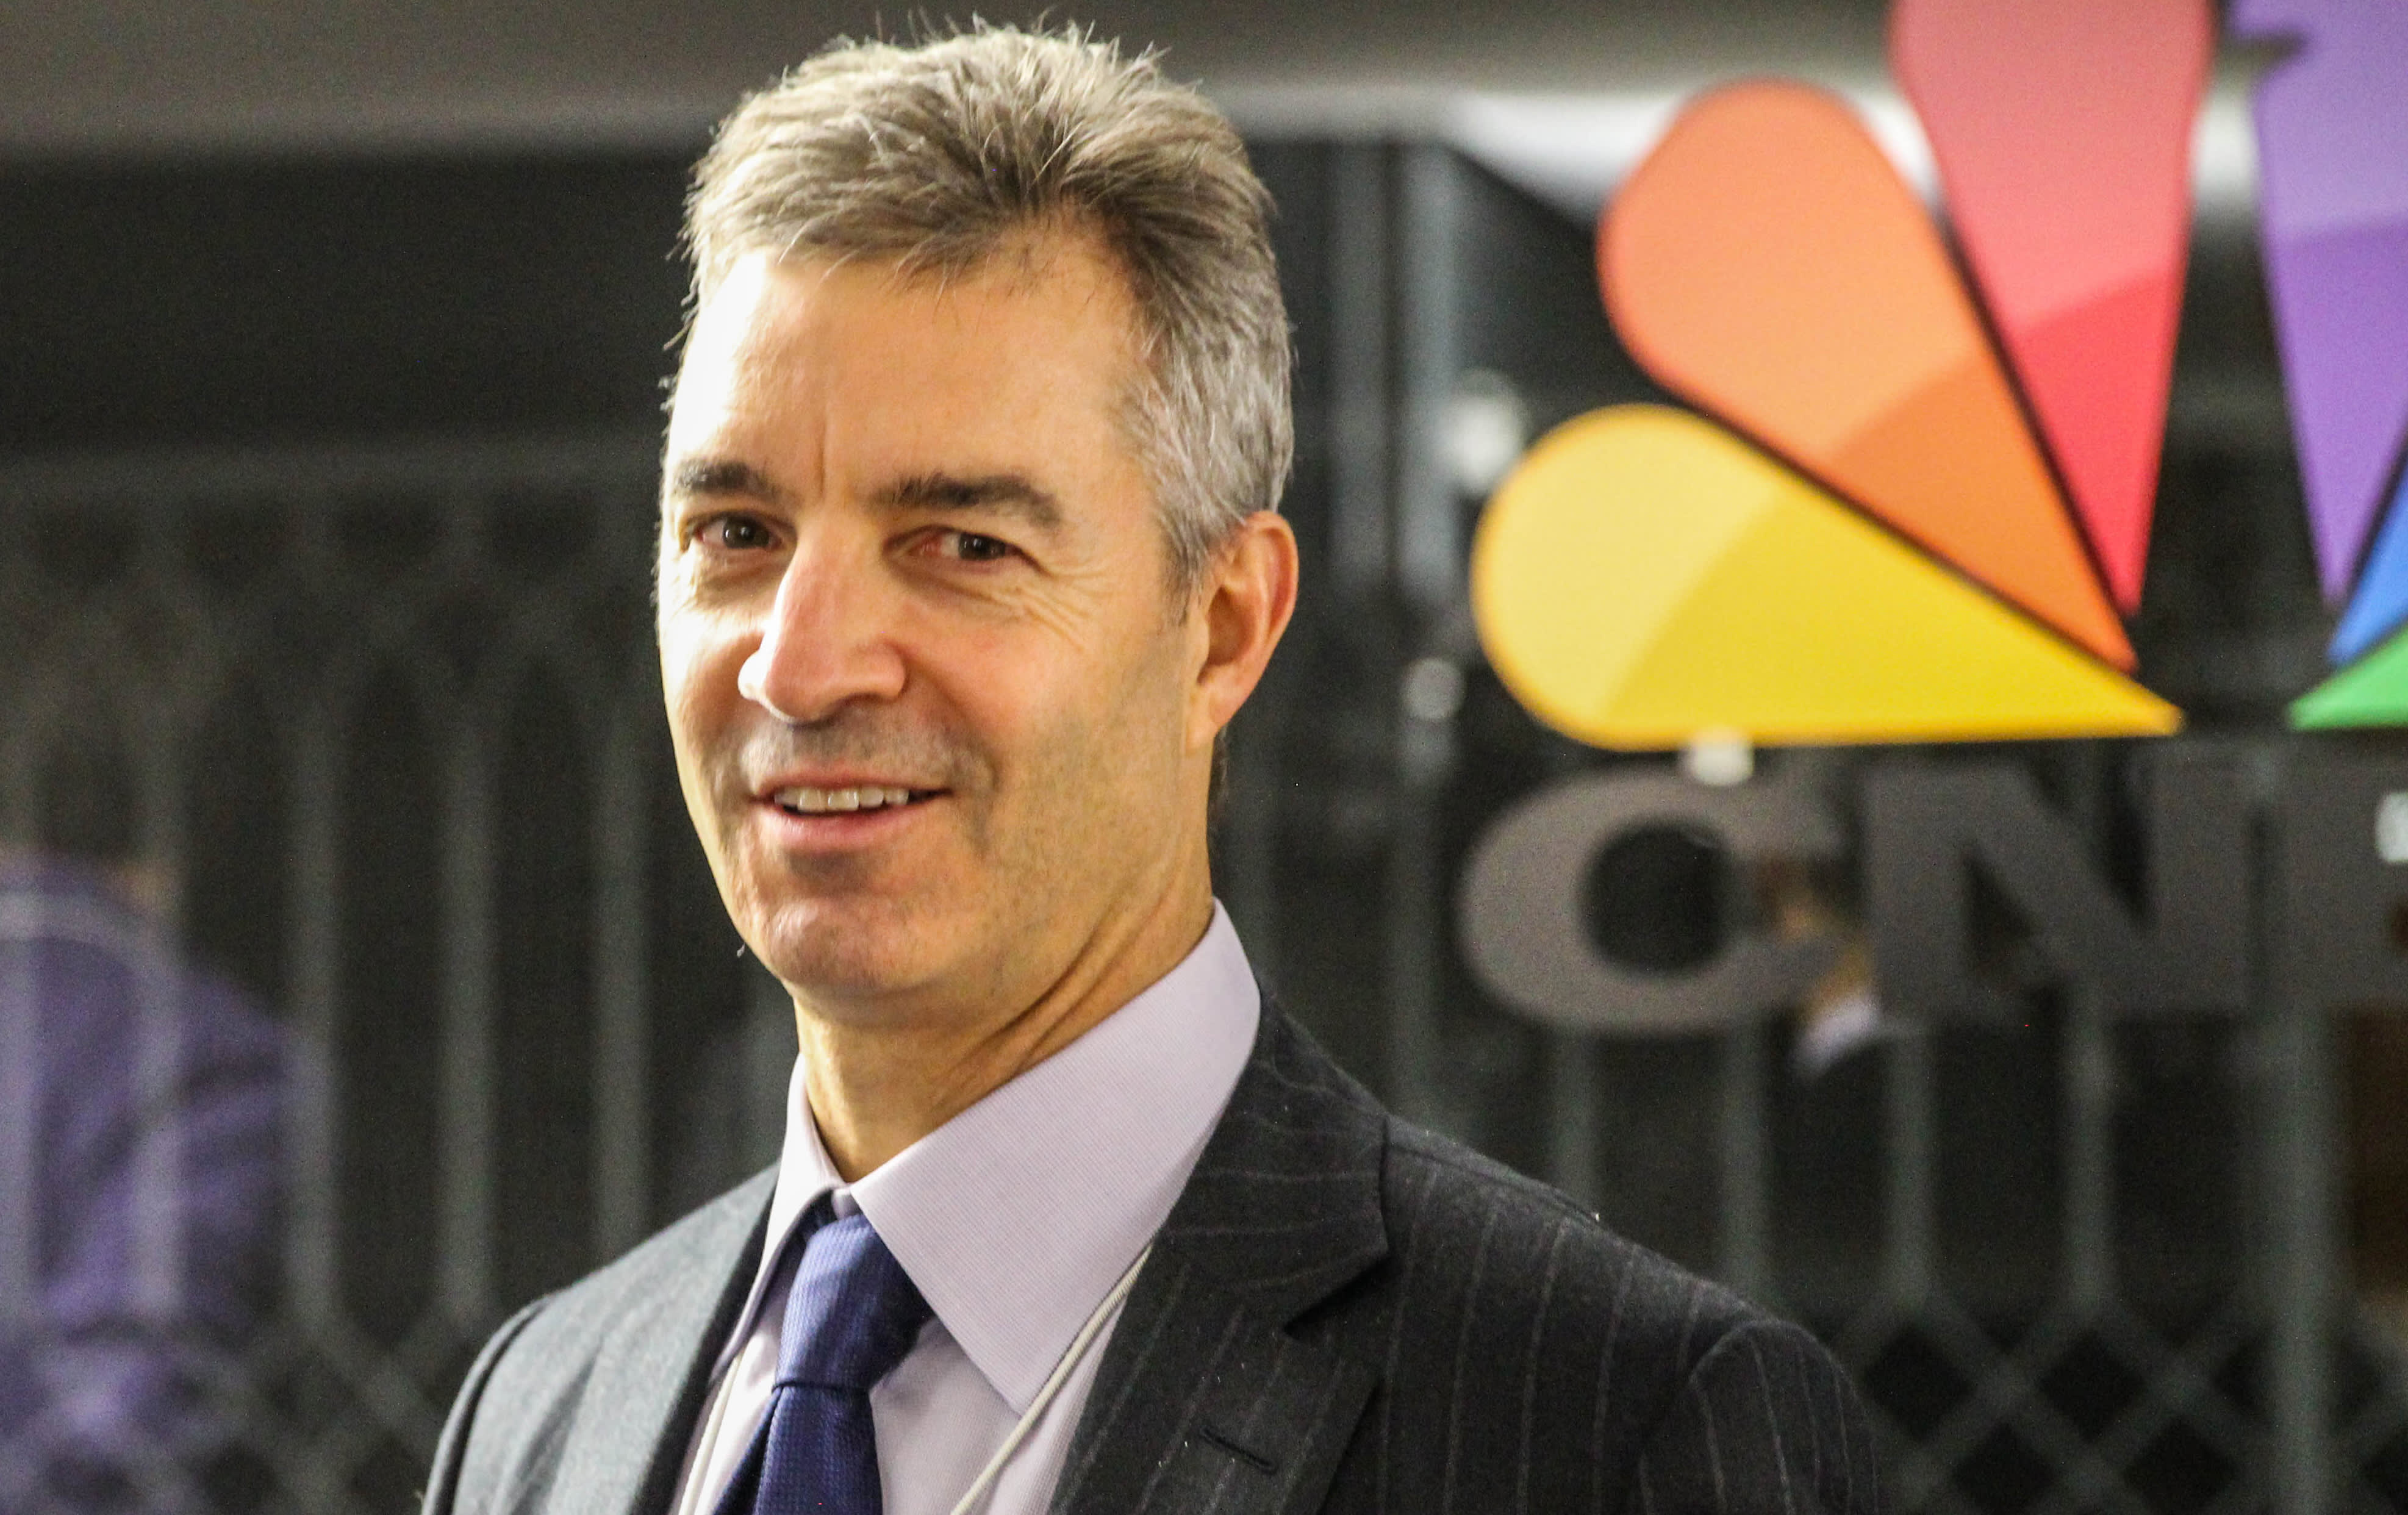 Windows Dan Loeb's Third Point takes a stake in Alphabet, making it one of his biggest bets